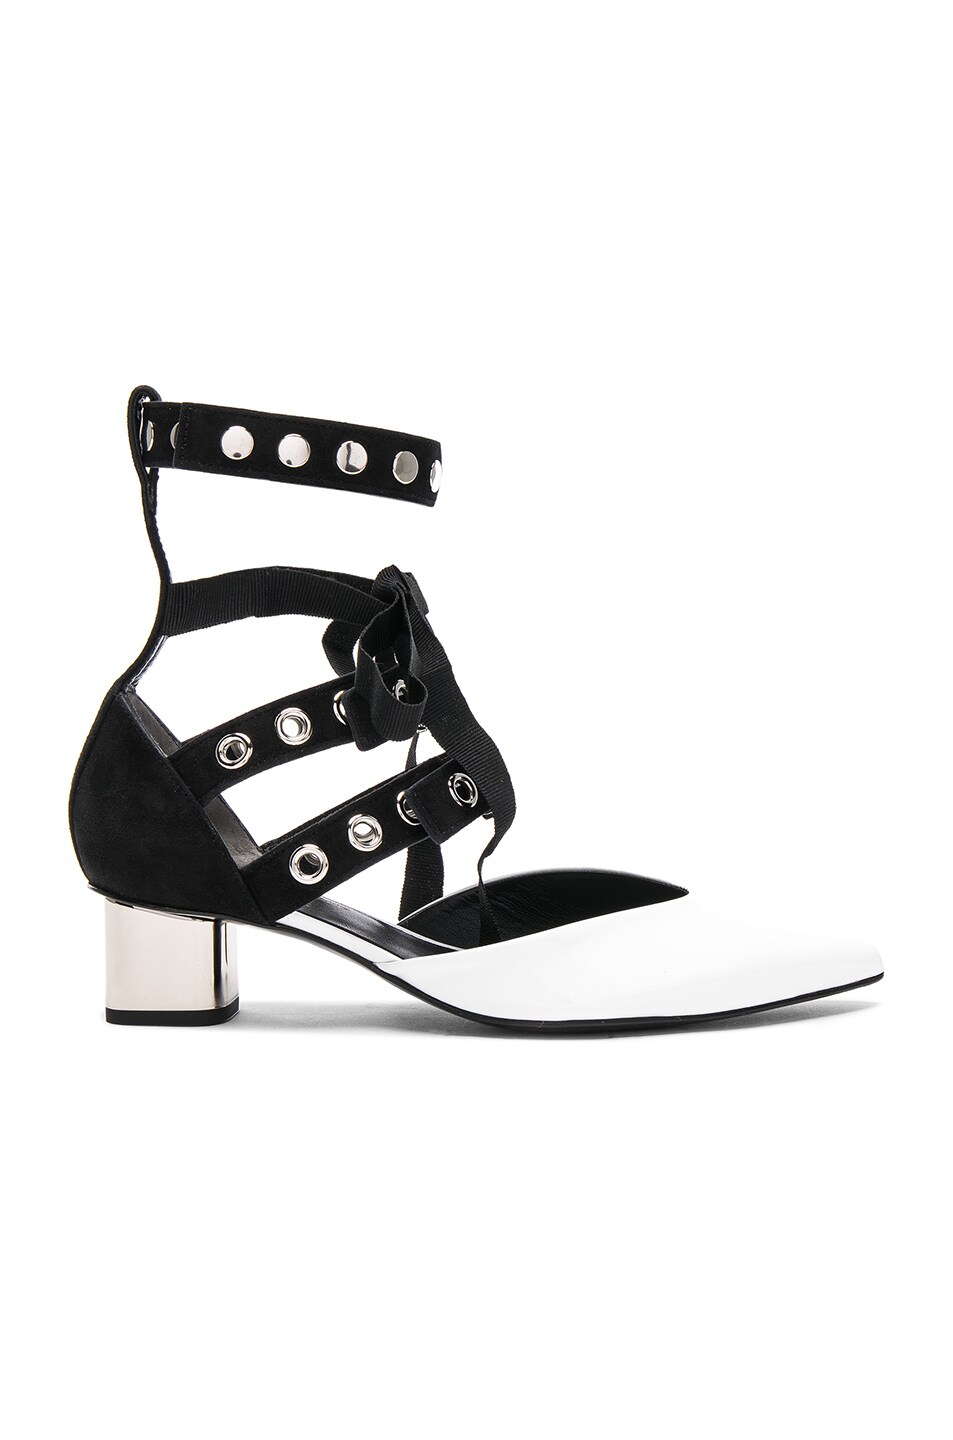 Image 1 of self-portrait x Robert Clergerie Patent Leather Susao Heels in Black & White Patent